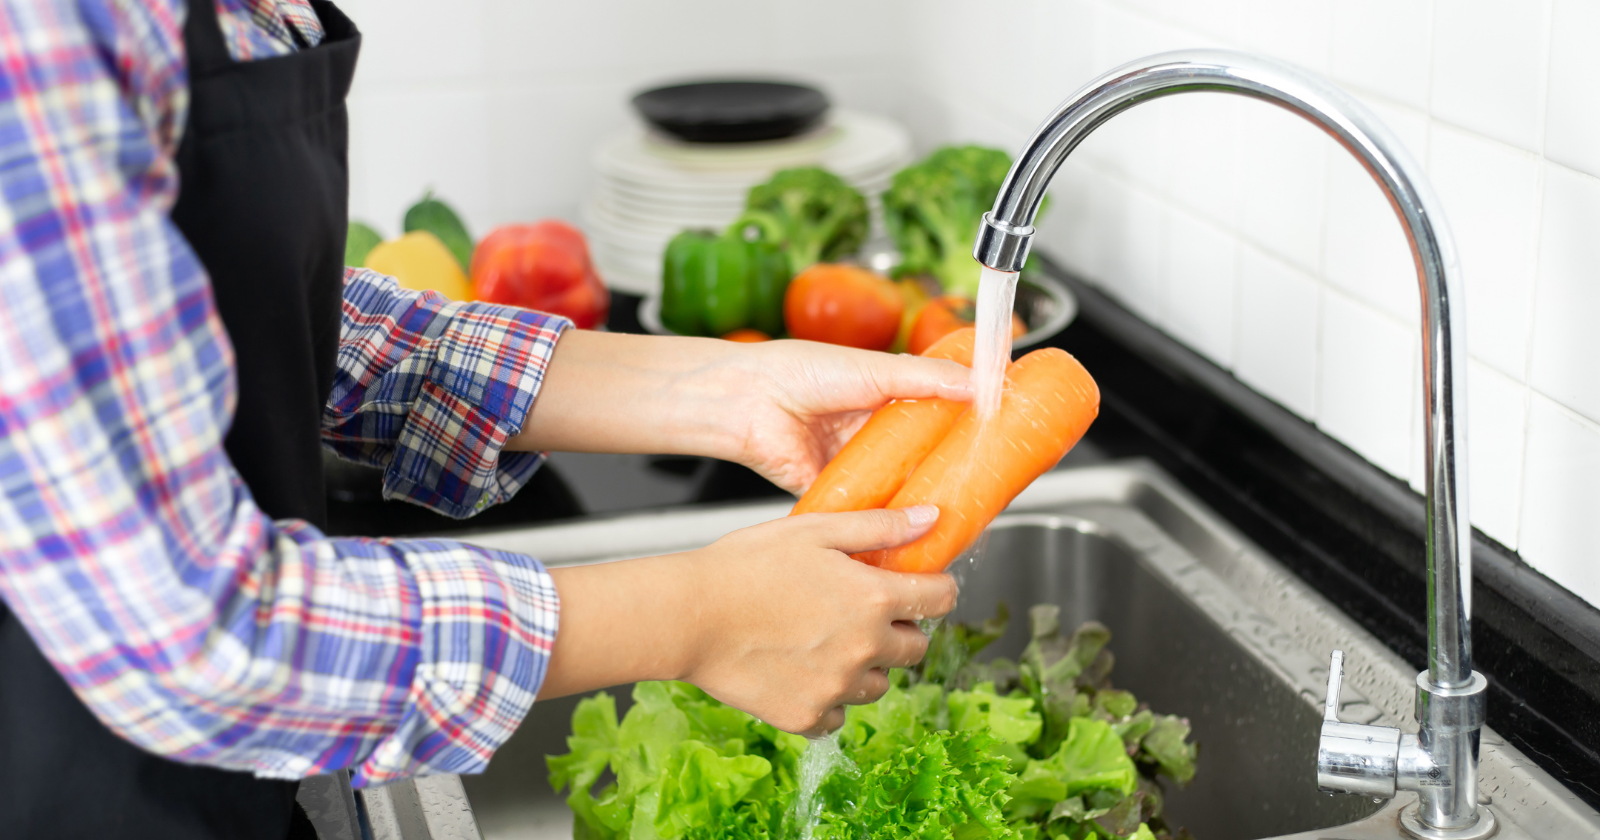 Fruits and vegetables: how do you remove pesticide residues?